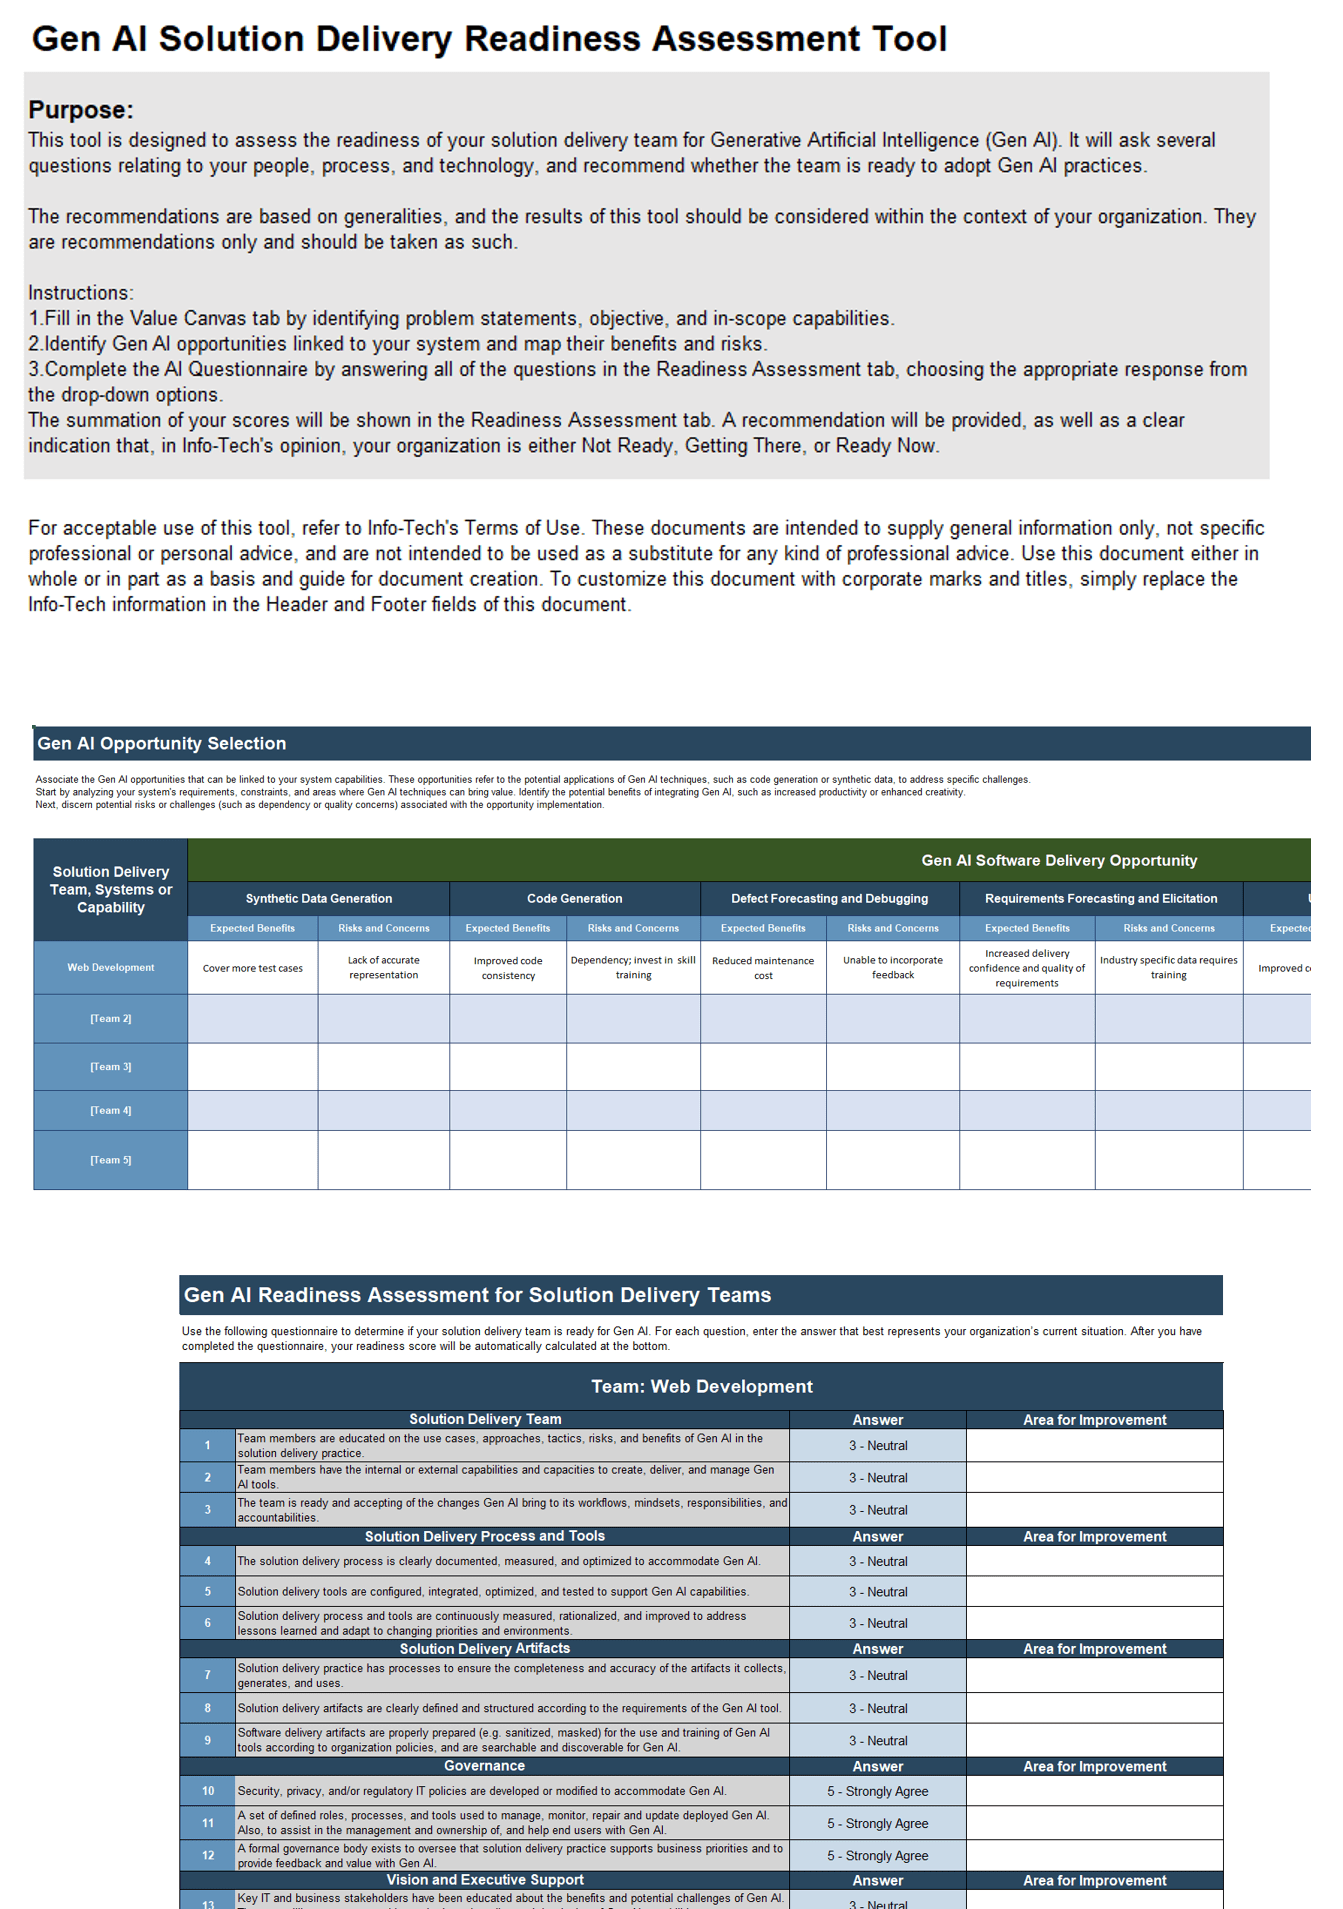 This is a series of three screenshots from the Gen AI Solution Delivery Readiness Assessment Tool